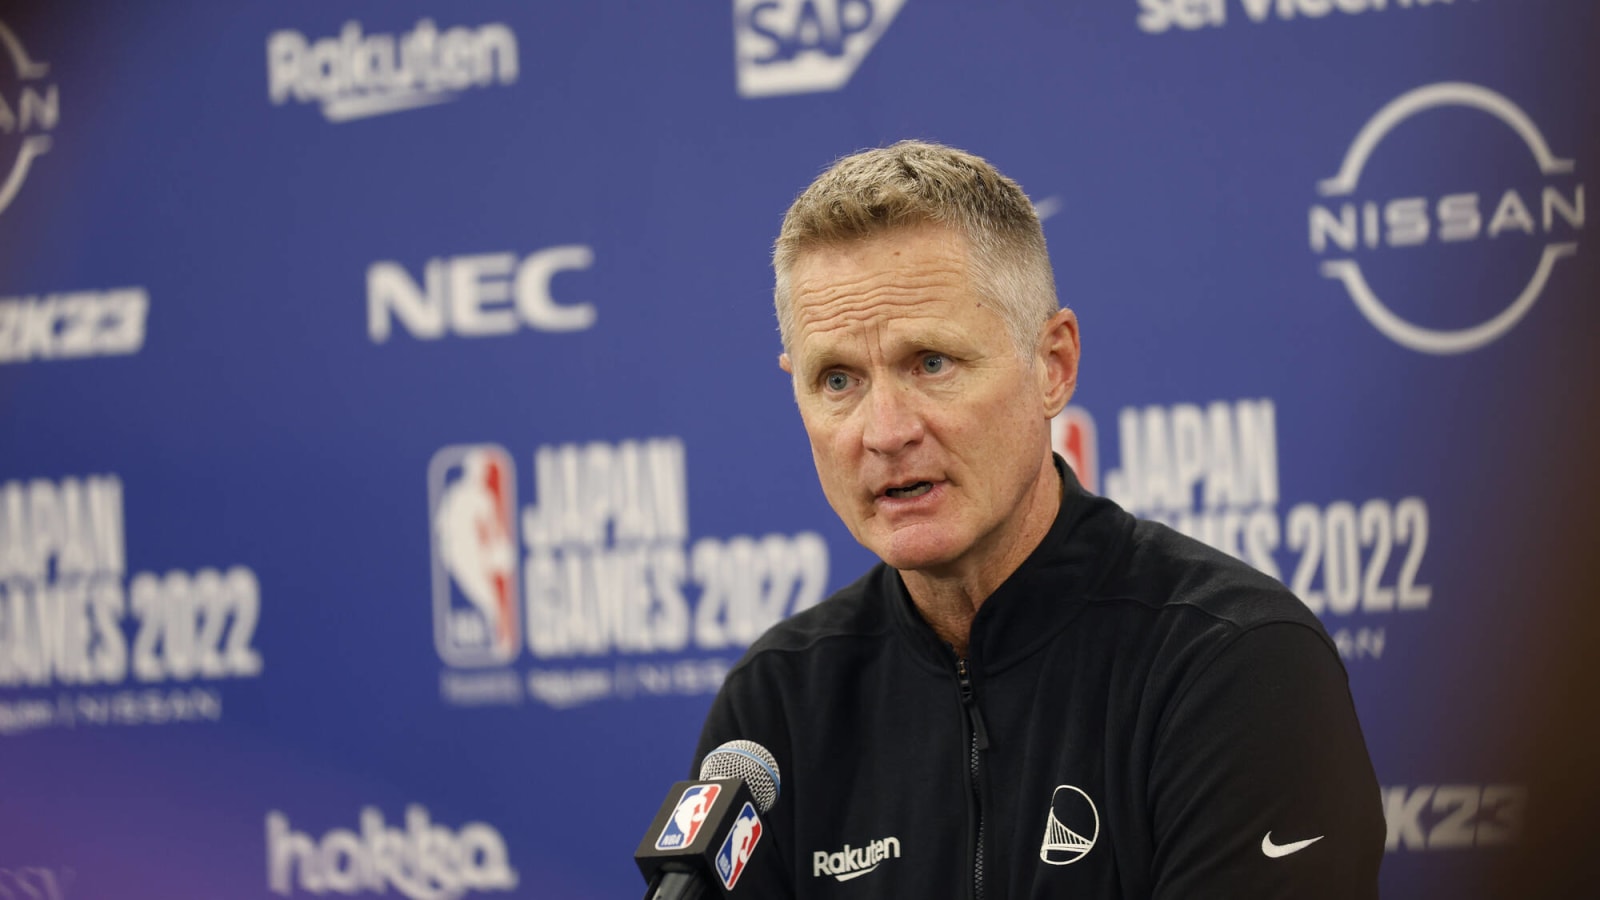 Steve Kerr Surprisingly Explained That Michael Jordan Punching Him In The Face Improved Their Relationship: "Michael Was Definitely Testing Me, And I Responded. I Feel Like I Kind Of Passed The Test."